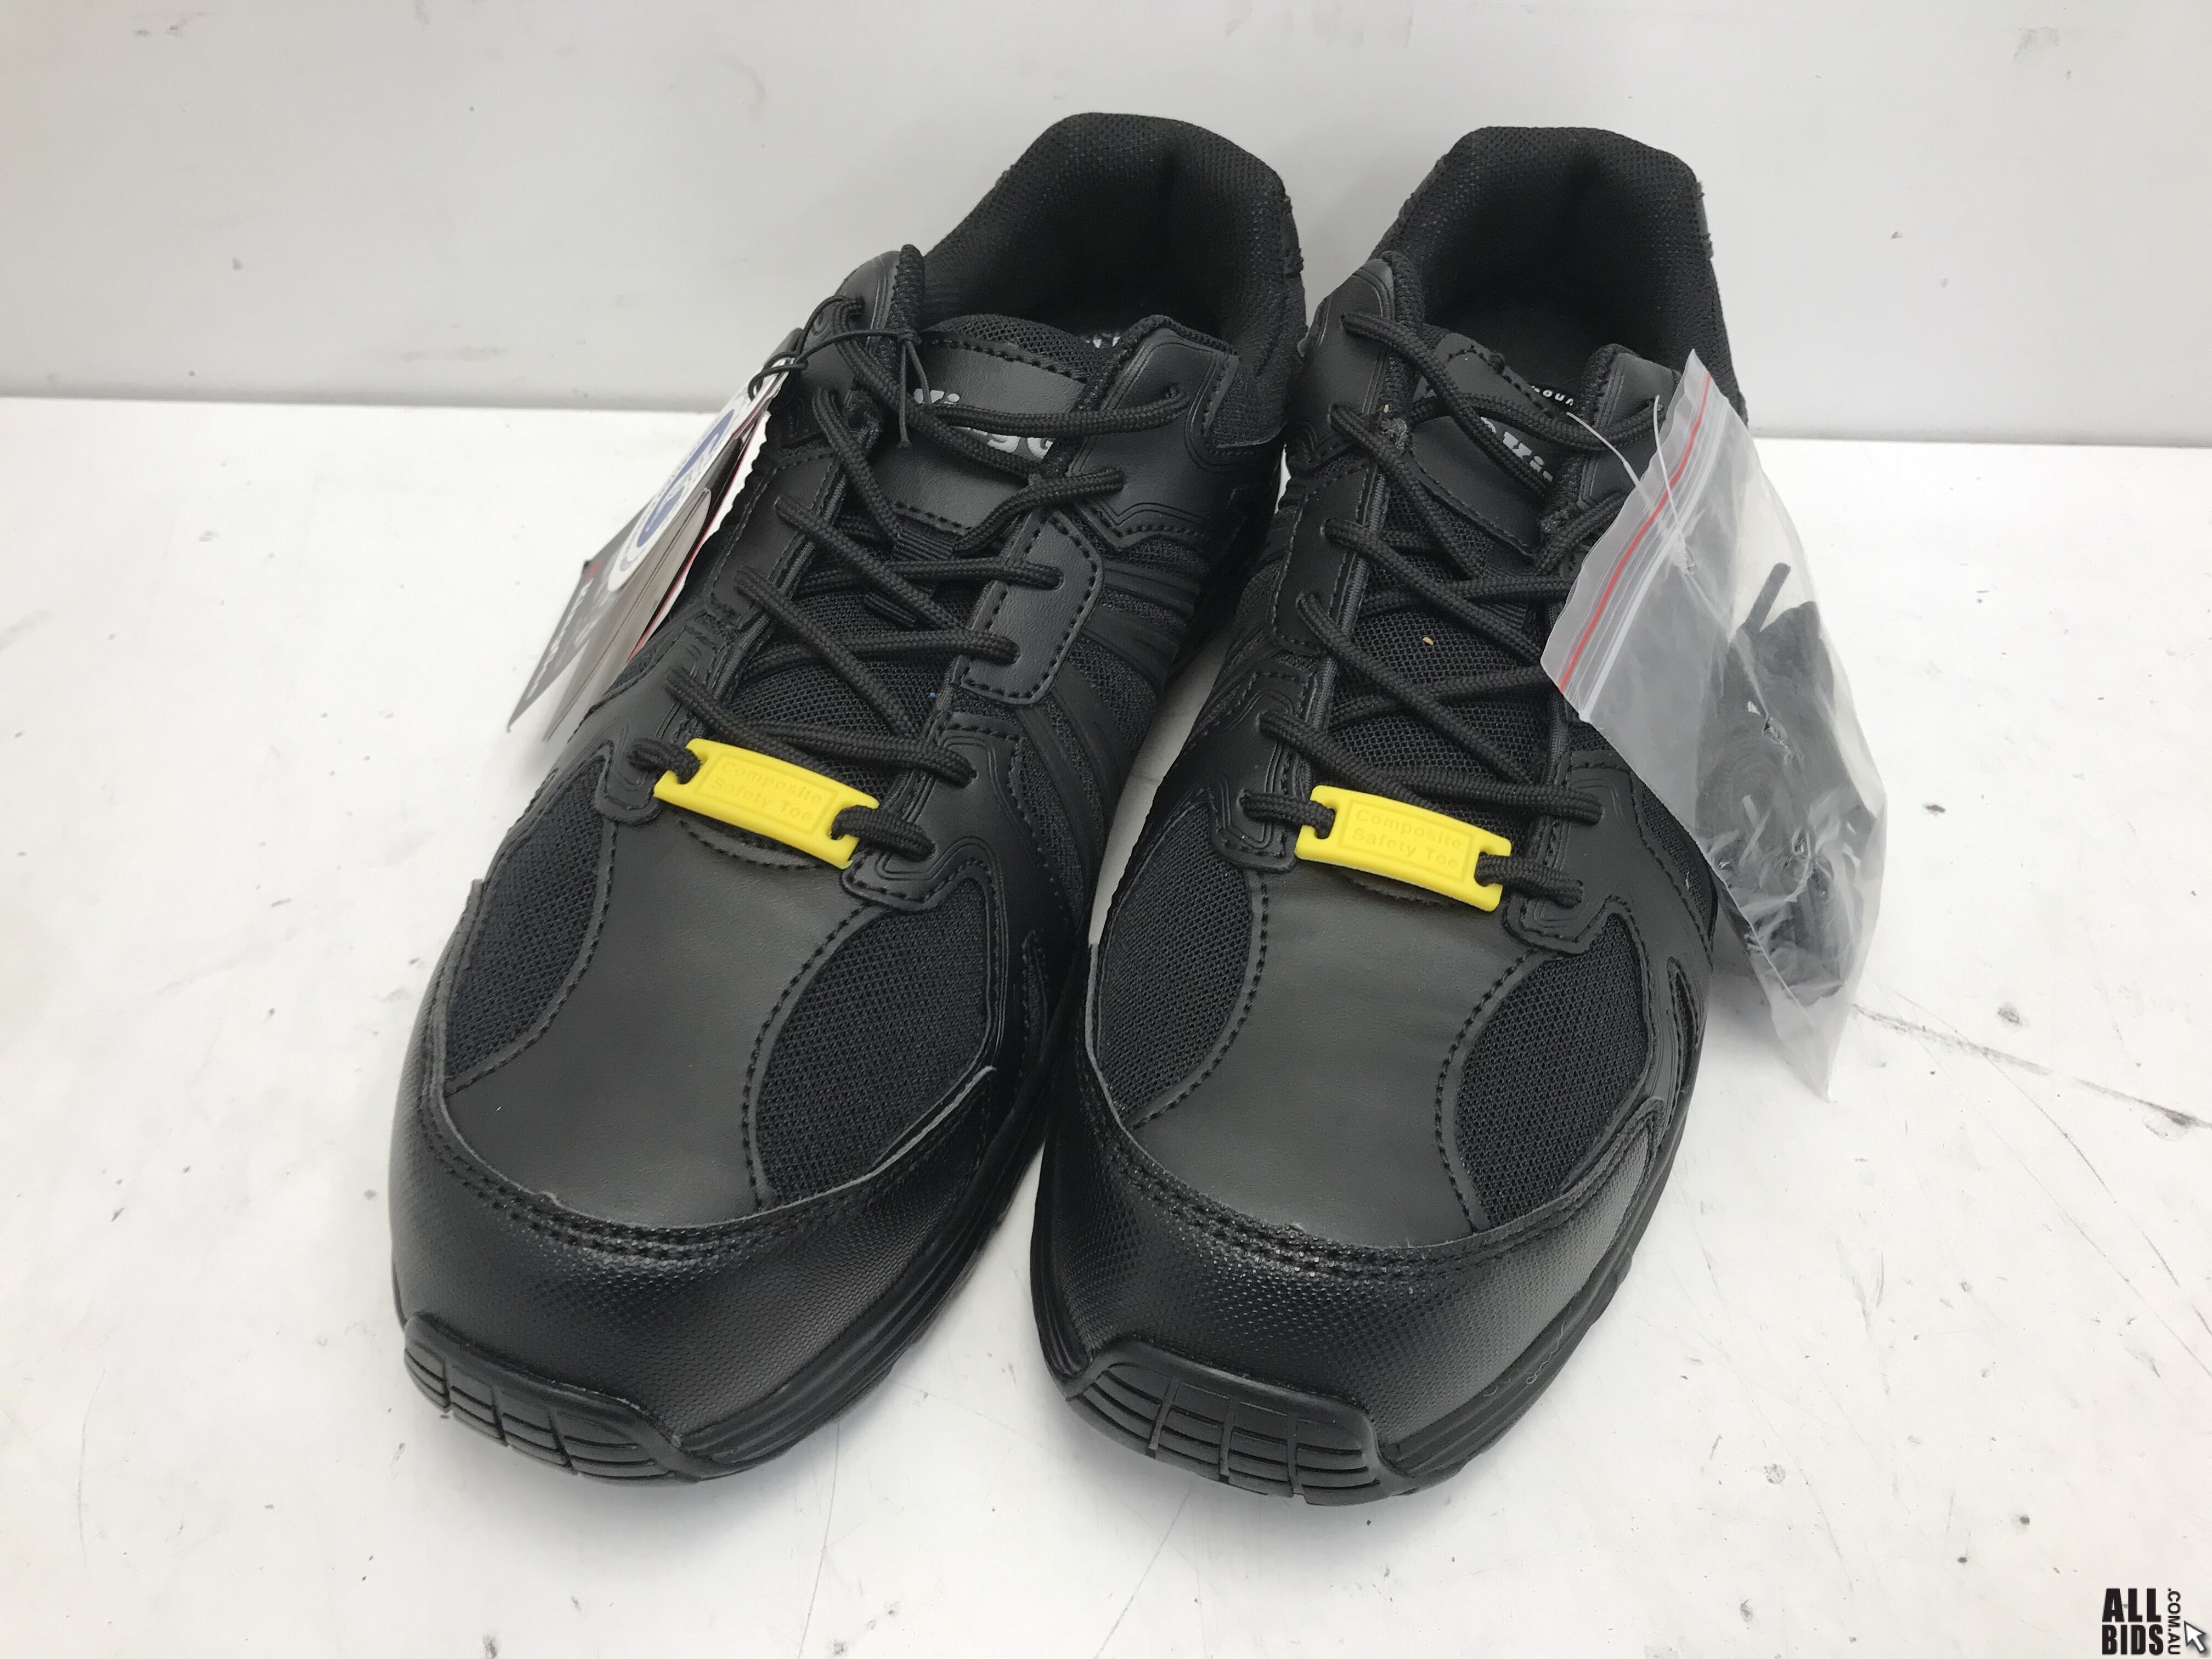 King Gee Composite Toe Safety Shoes - Lot 1231417 | ALLBIDS